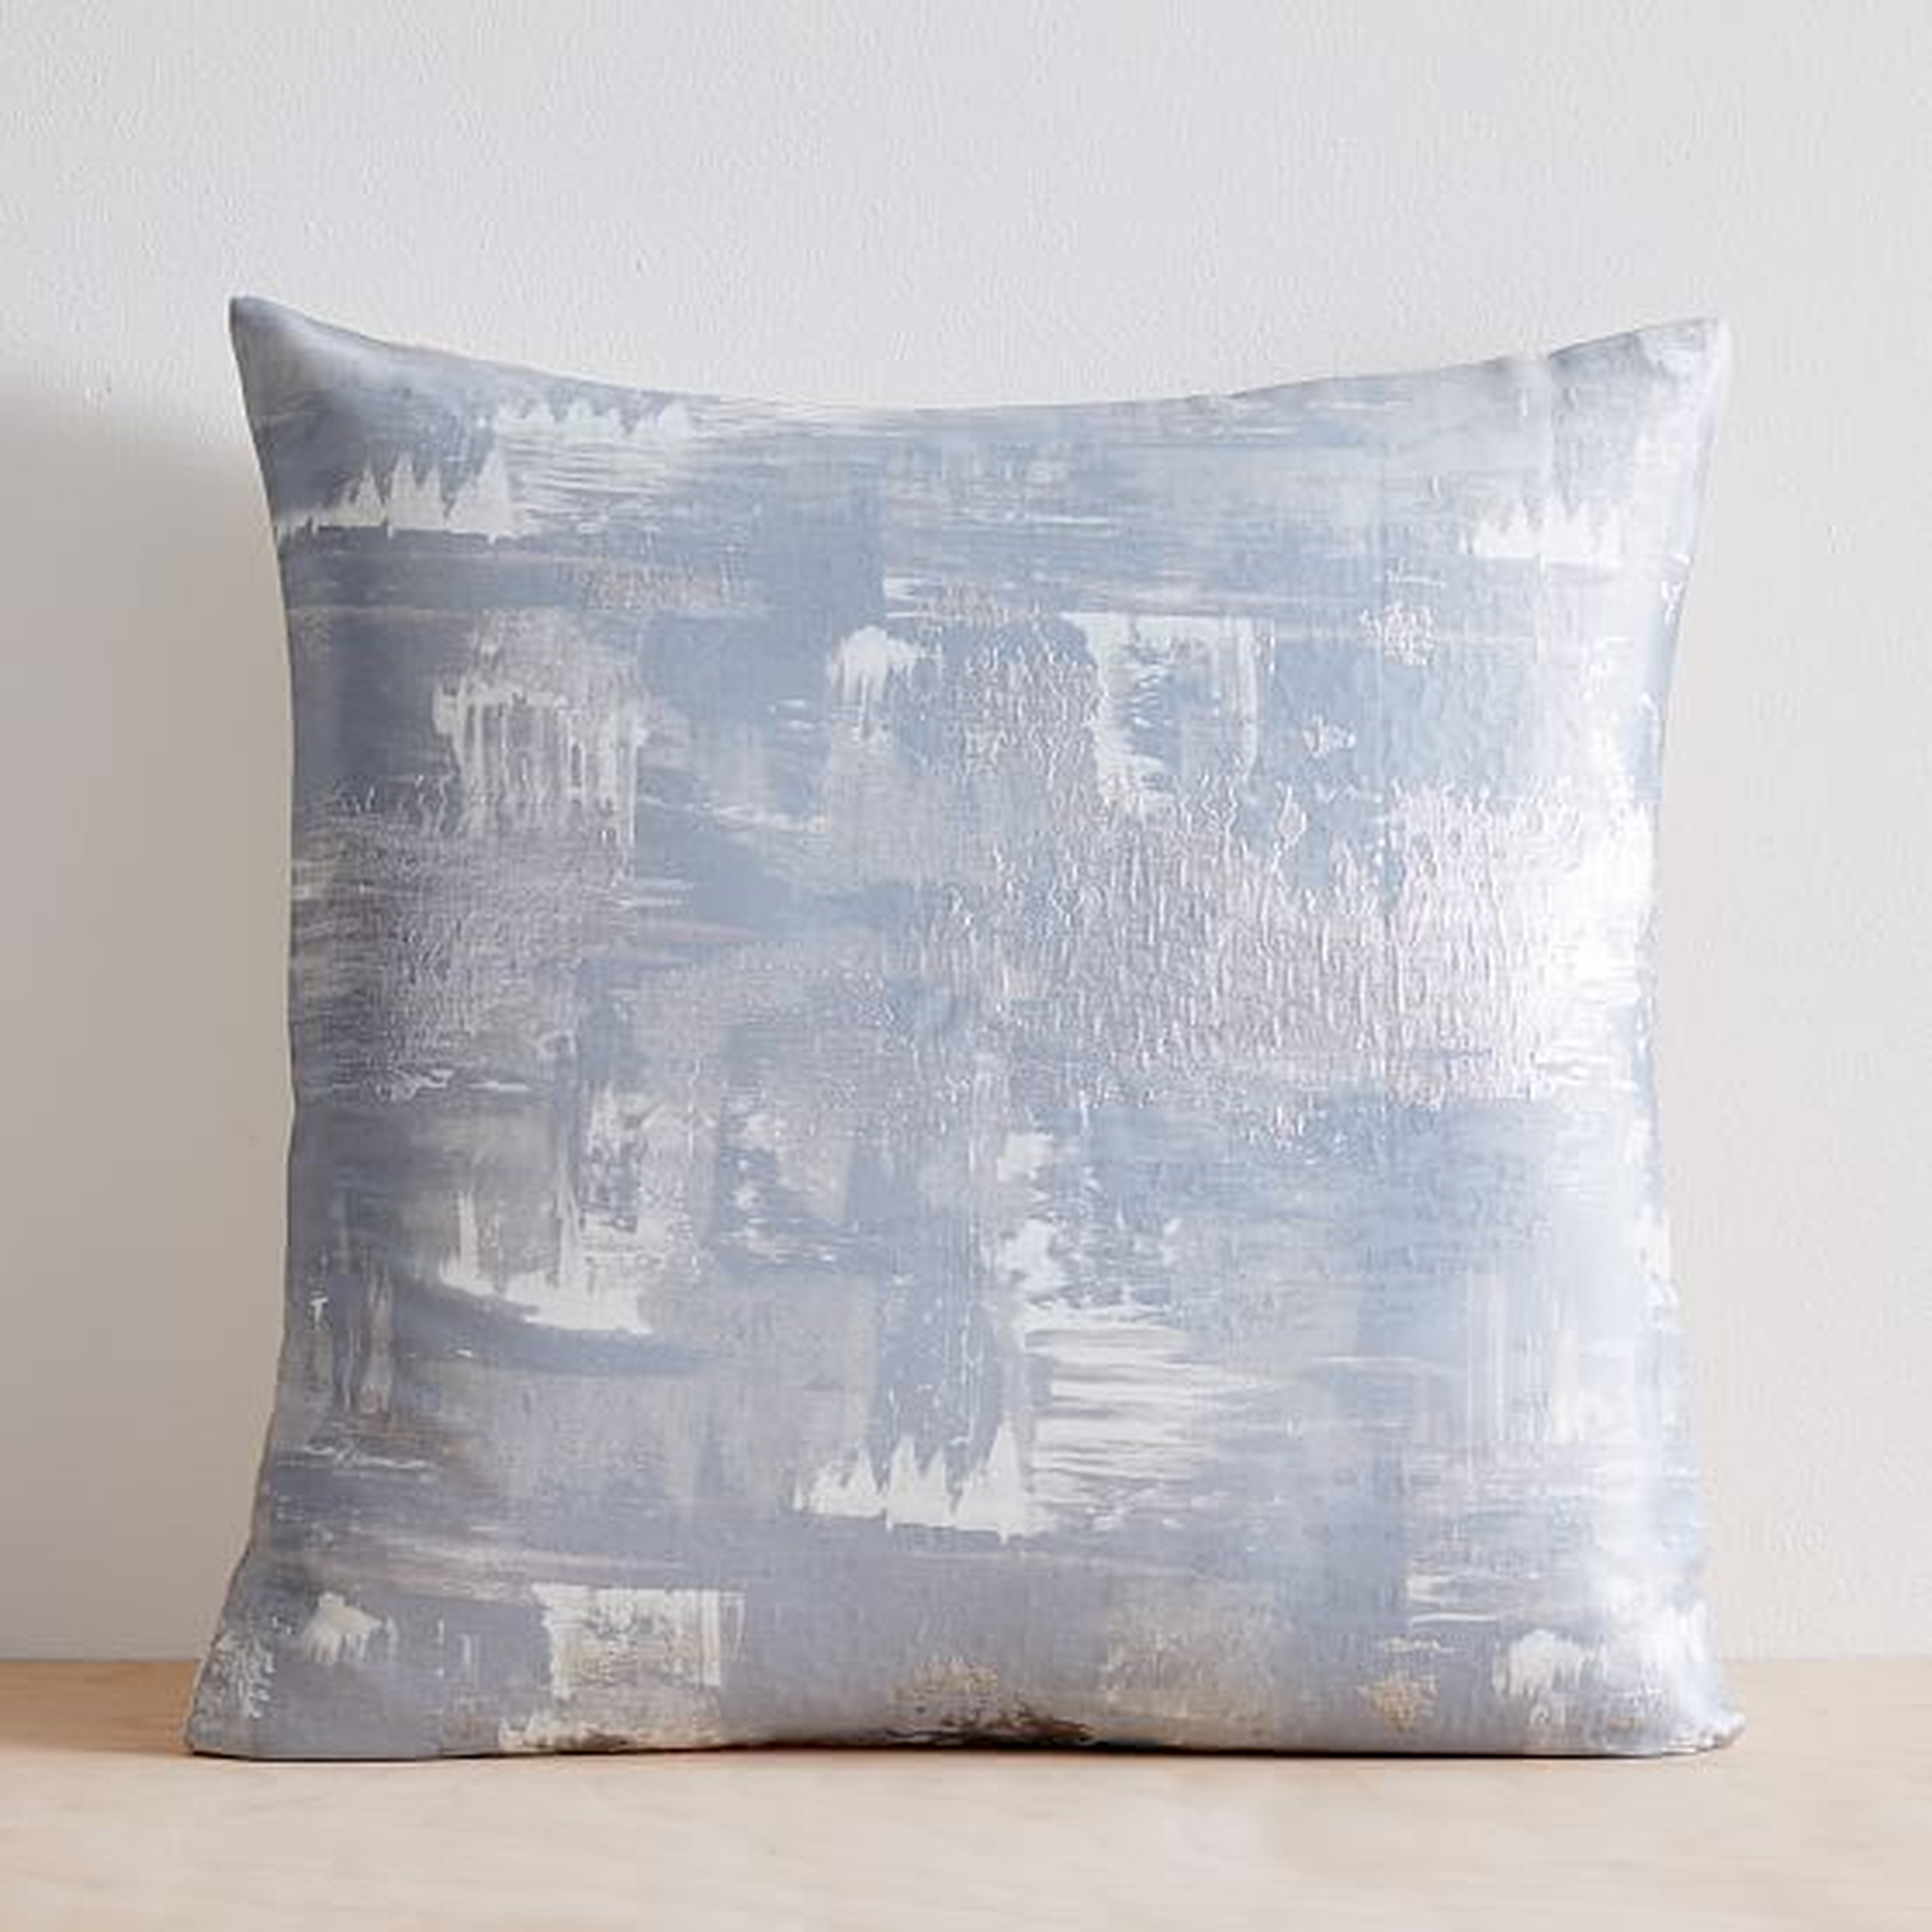 Painterly Brocade Pillow Cover, Set of 2, Silver Blue, 20"x20" - West Elm